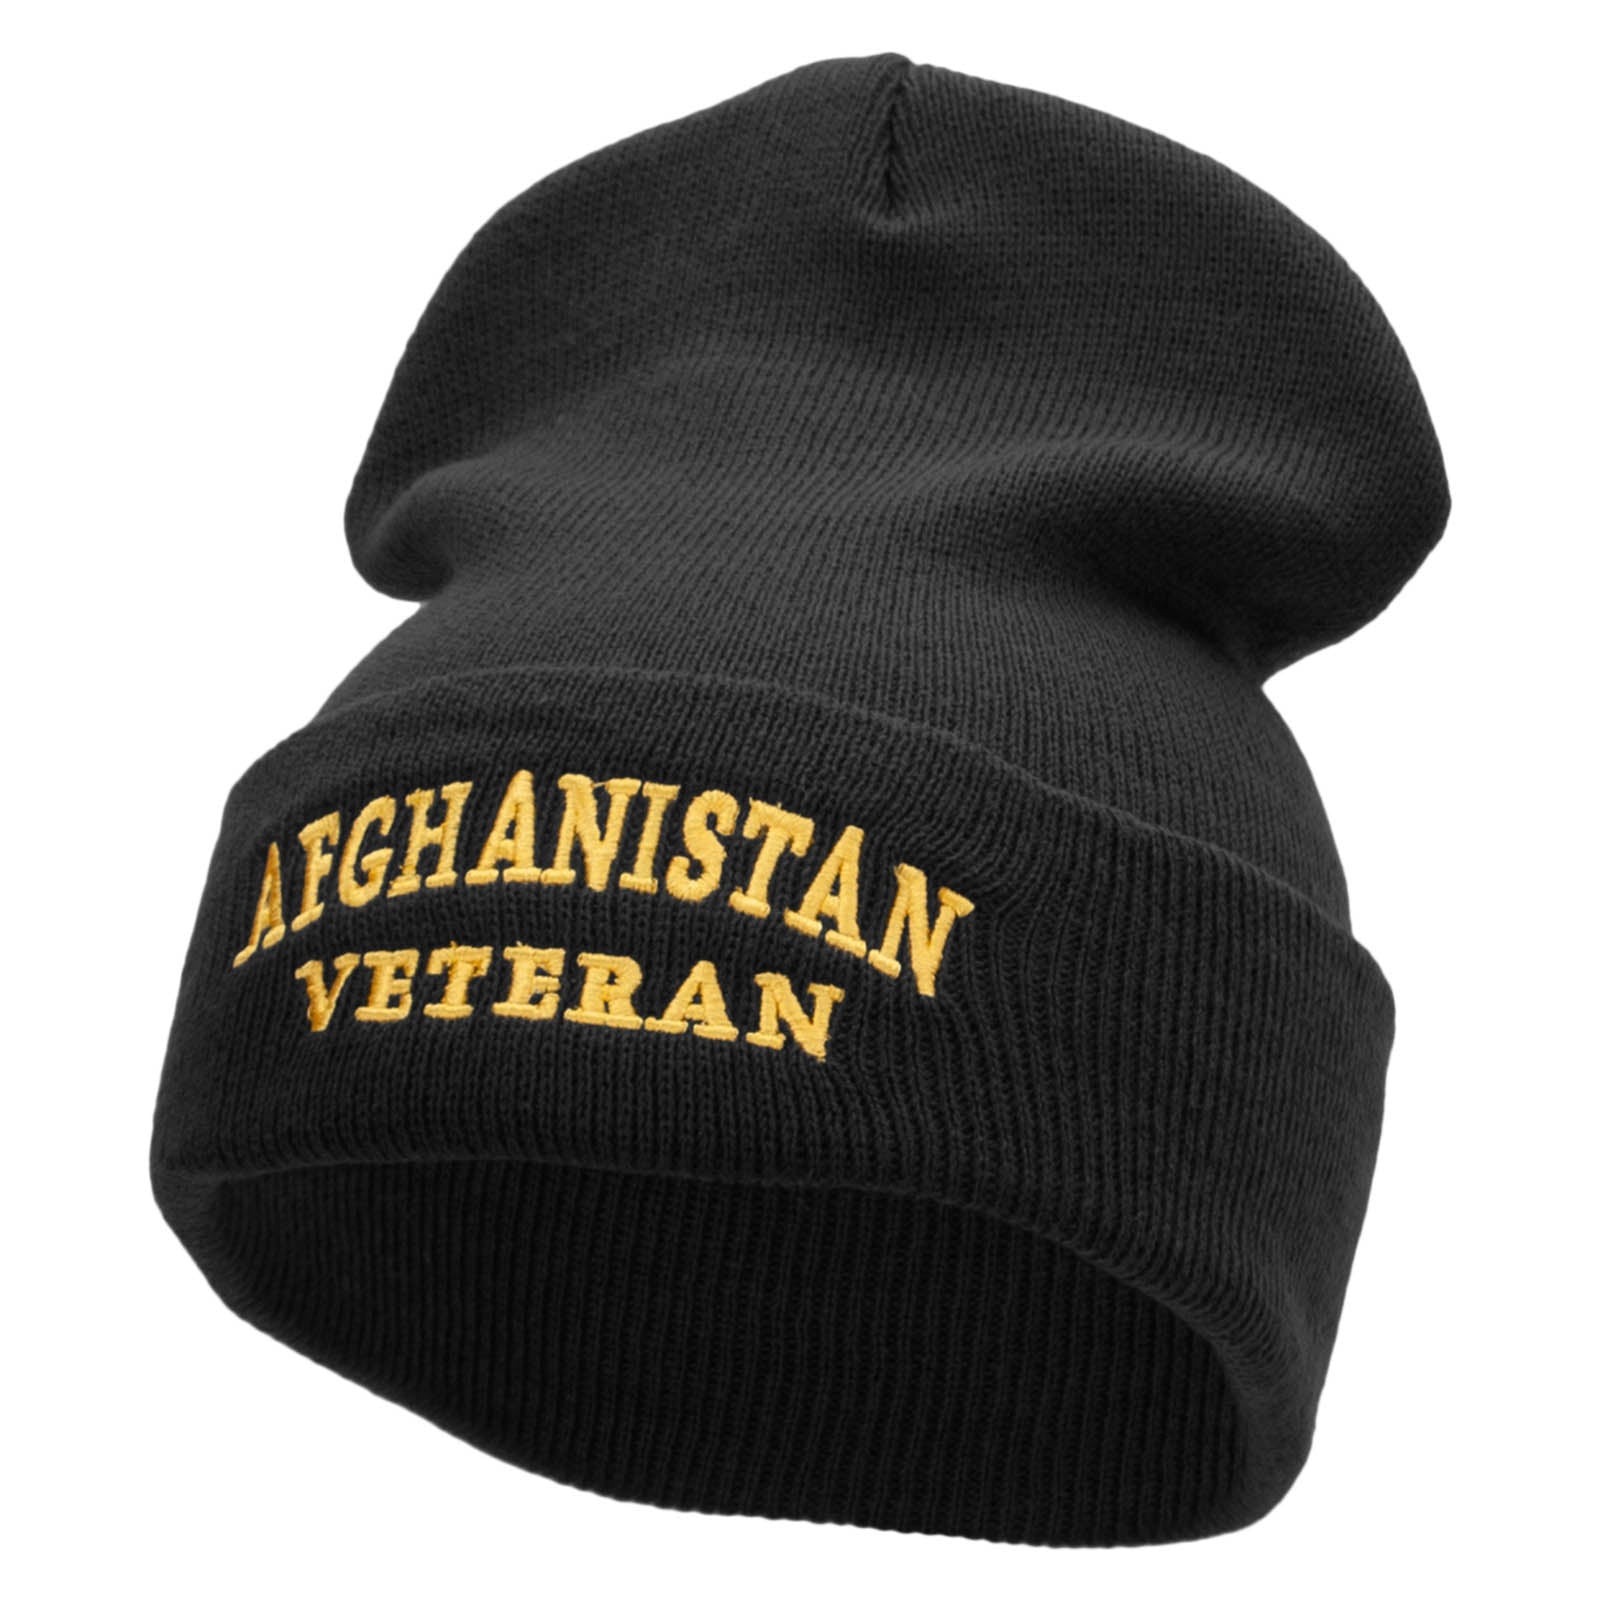 Afghanistan Vet Embroidered 12 Inch Solid Long Beanie Made in USA - Black OSFM